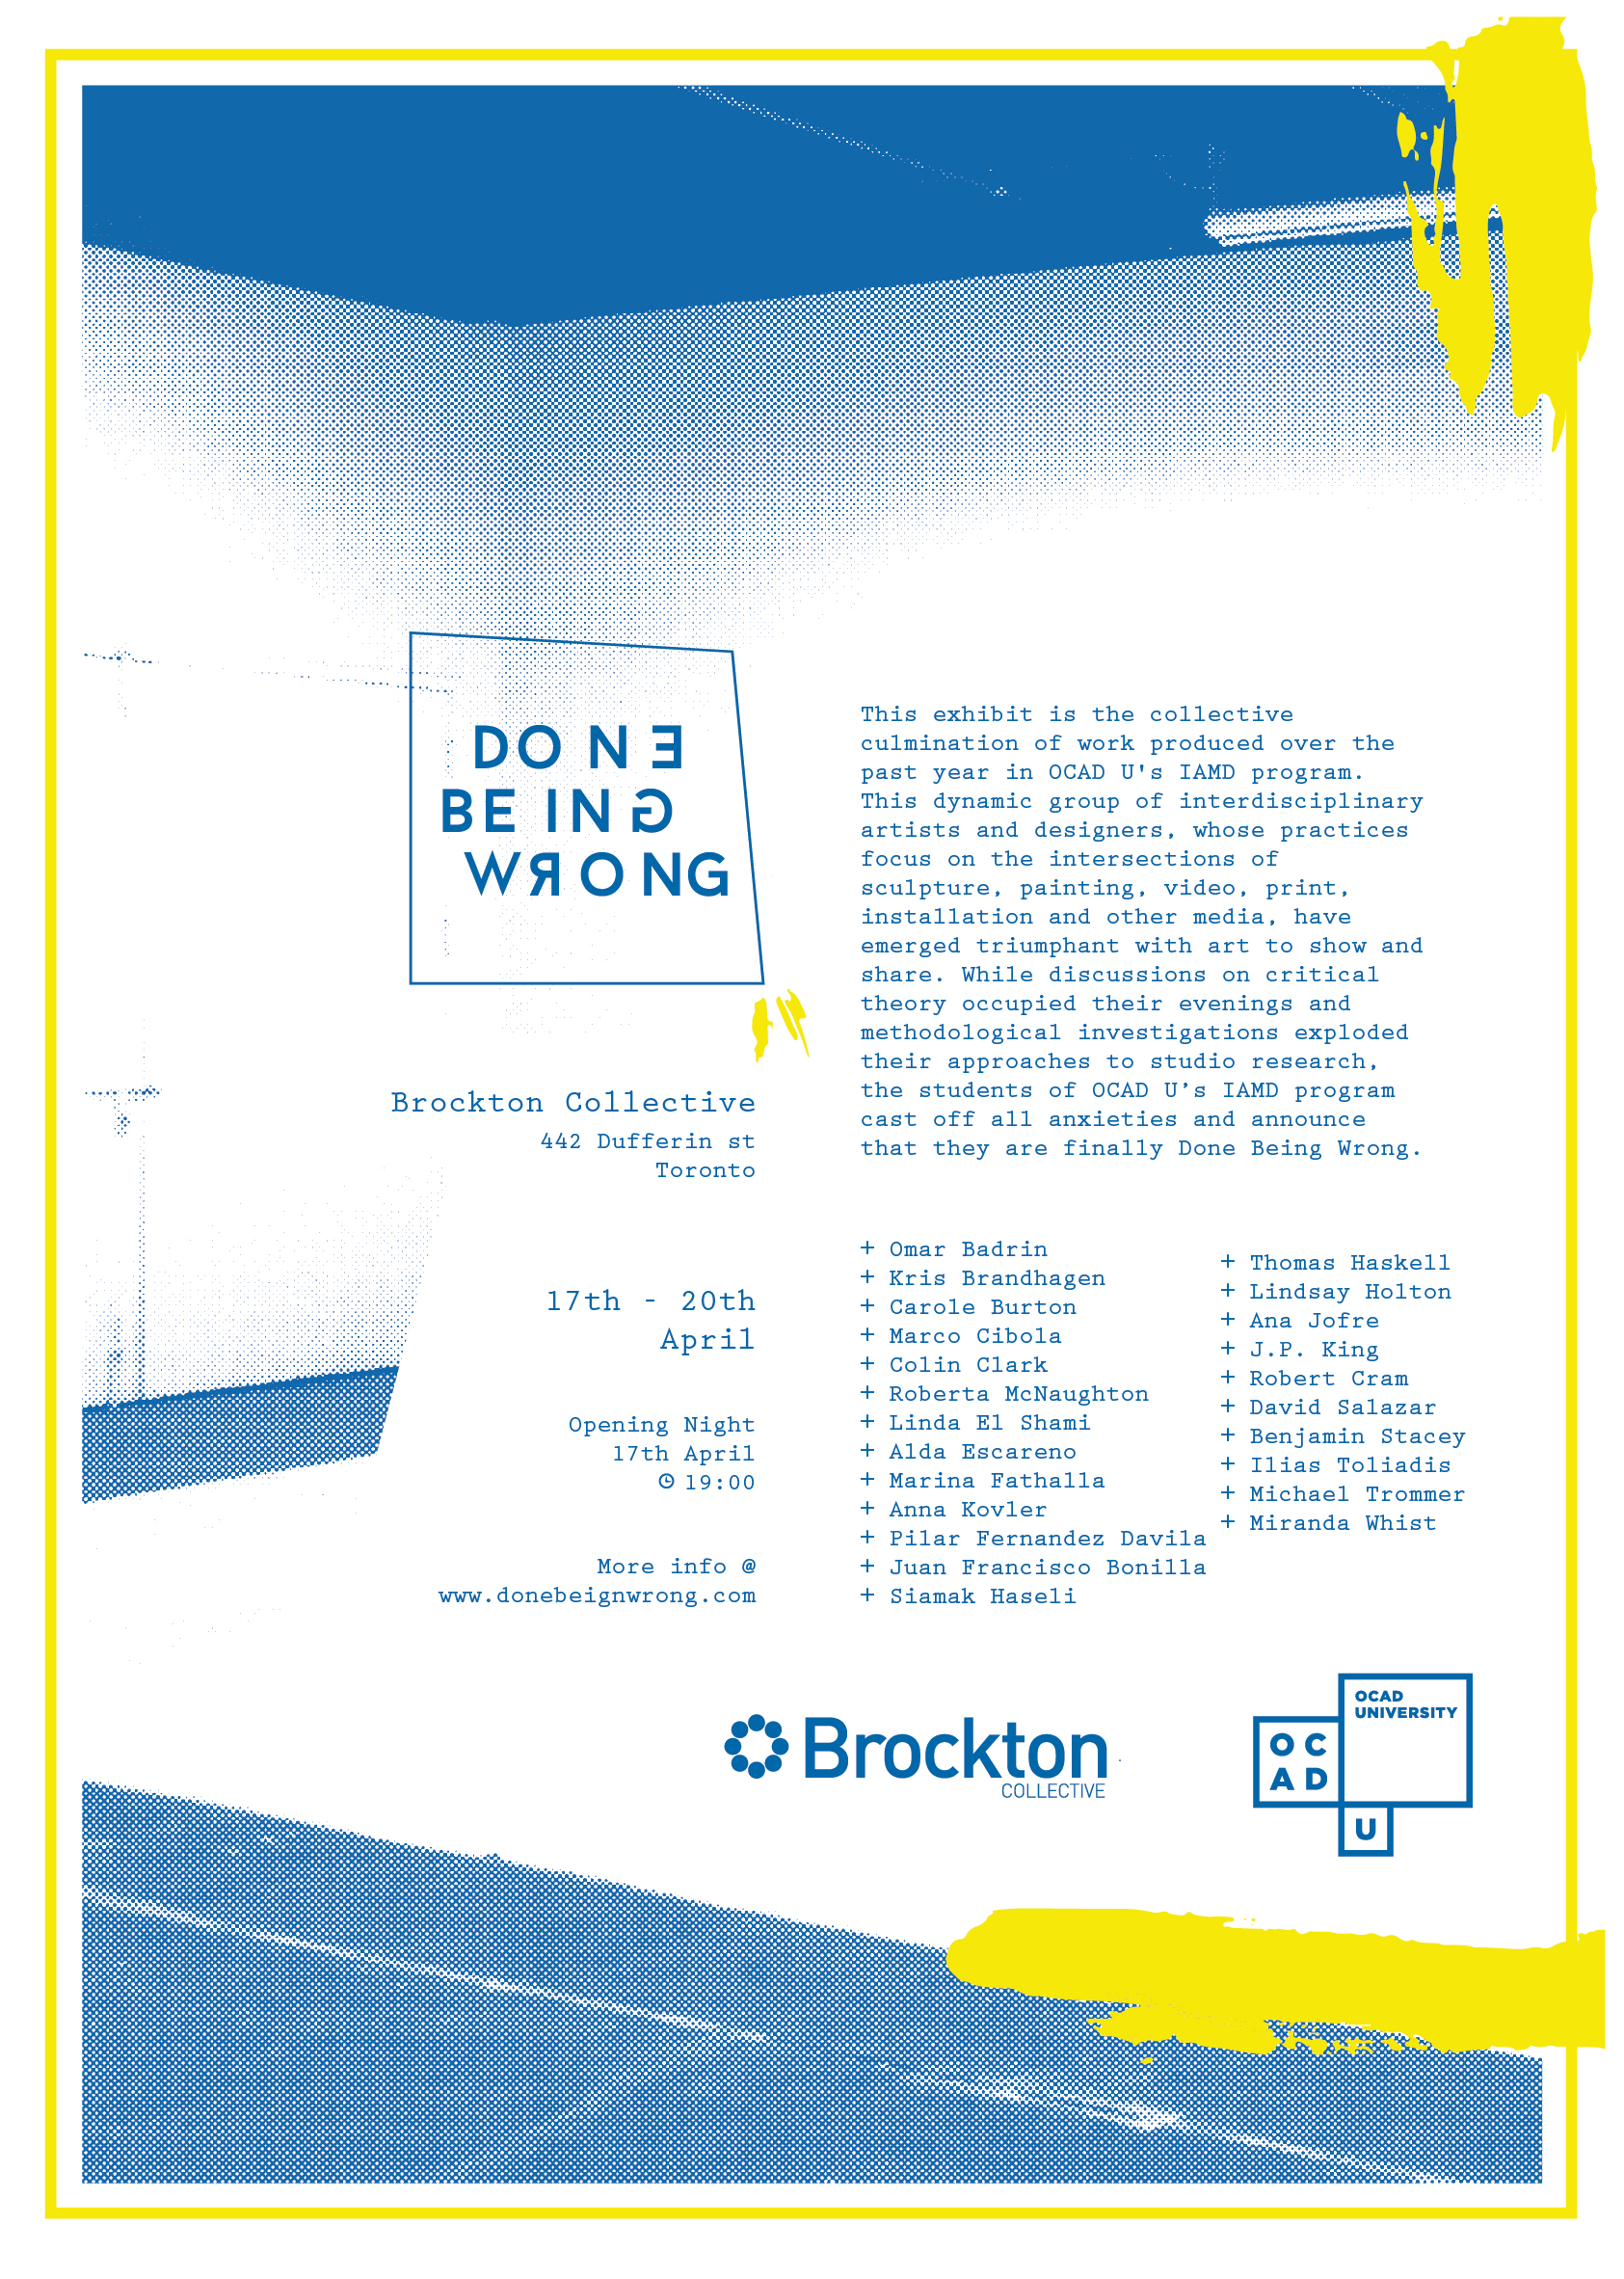 Brockton Presents: Done Being Wrong